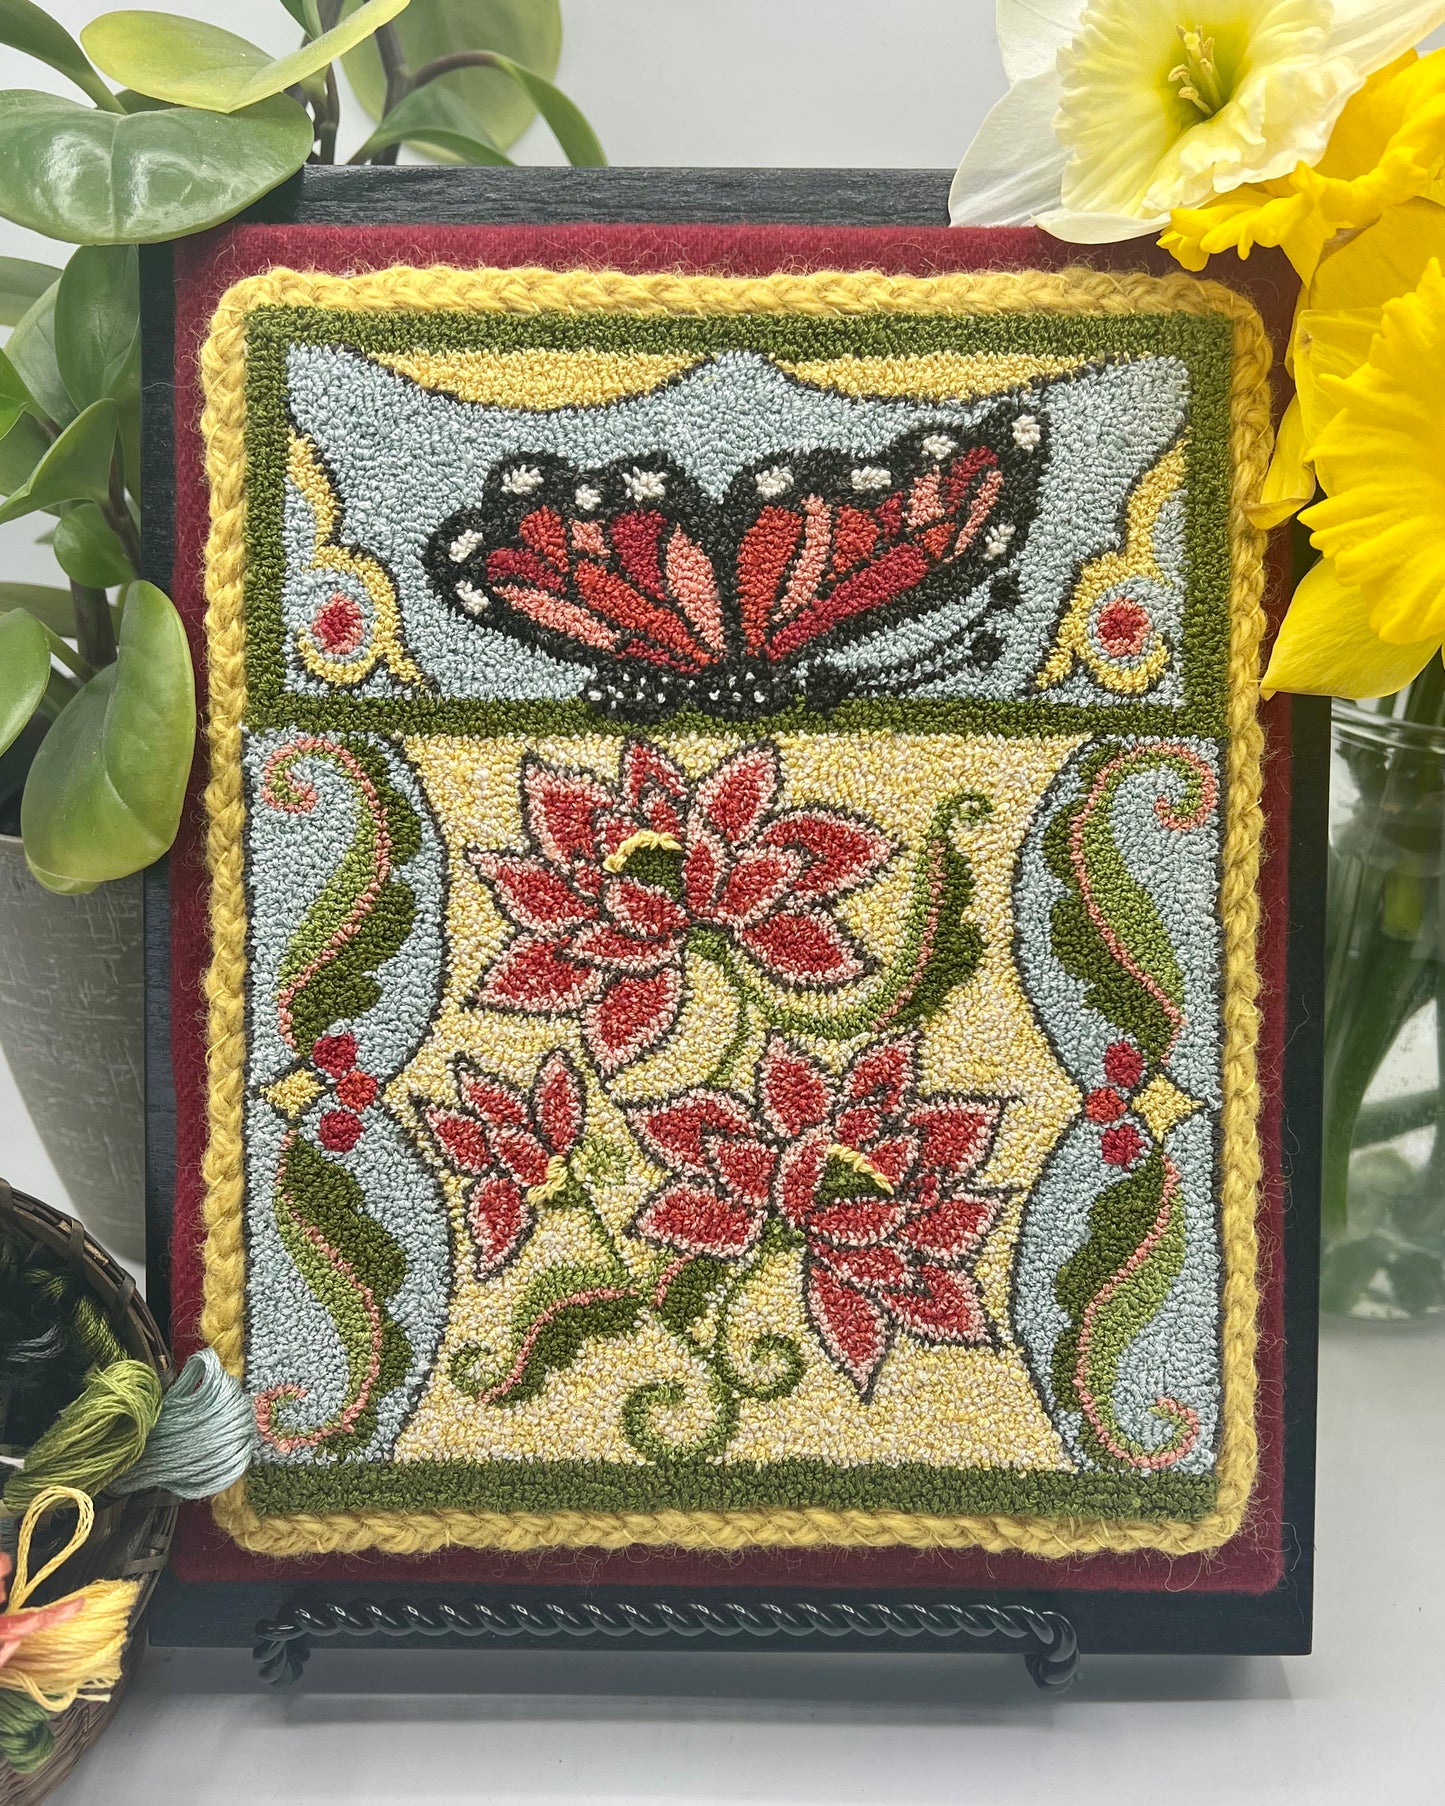 Summertime-PDF Punch Needle Pattern Digital Download by Orphaned Wool. This is the second pattern in the Seasonal Collection of four patterns. Enjoy creating this lovely Butterfly and Floral design. Copyright 2022 Kelly Kanyok, Orphaned Wool.